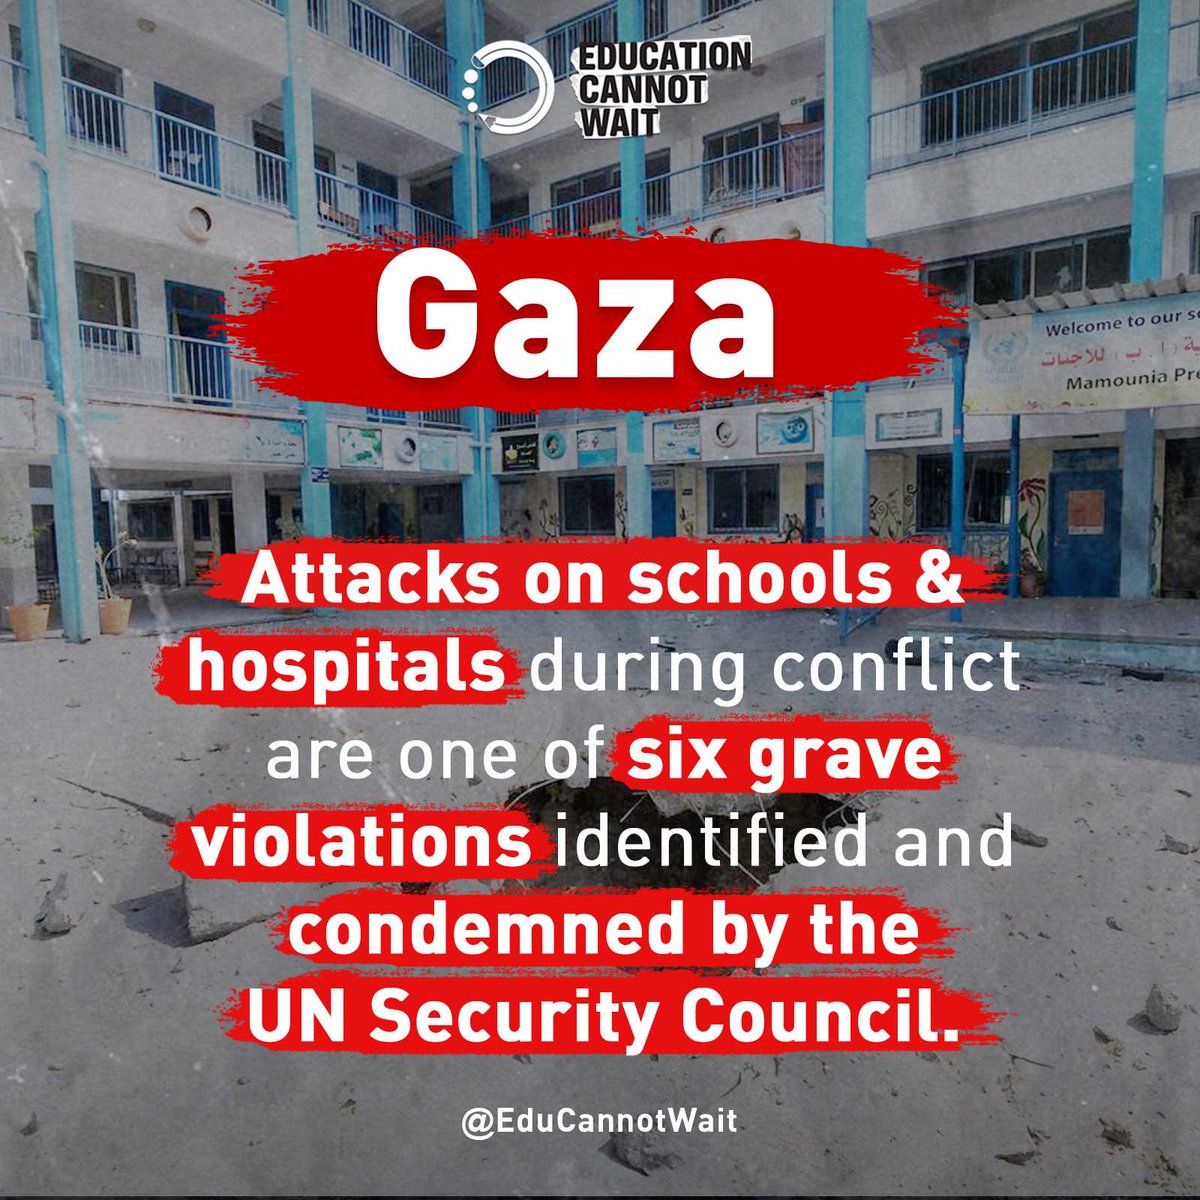 Attacks on schools & hospitals during conflict are one of six grave violations identified and condemned by the @UN Security Council. Schools, teachers, children, hospitals: #NotATarget @un @unrwa @ungeneva @gcpeatweets @unrwausa @noradno @unrwa_eu @dfat @unocha #Ceasefire_Now